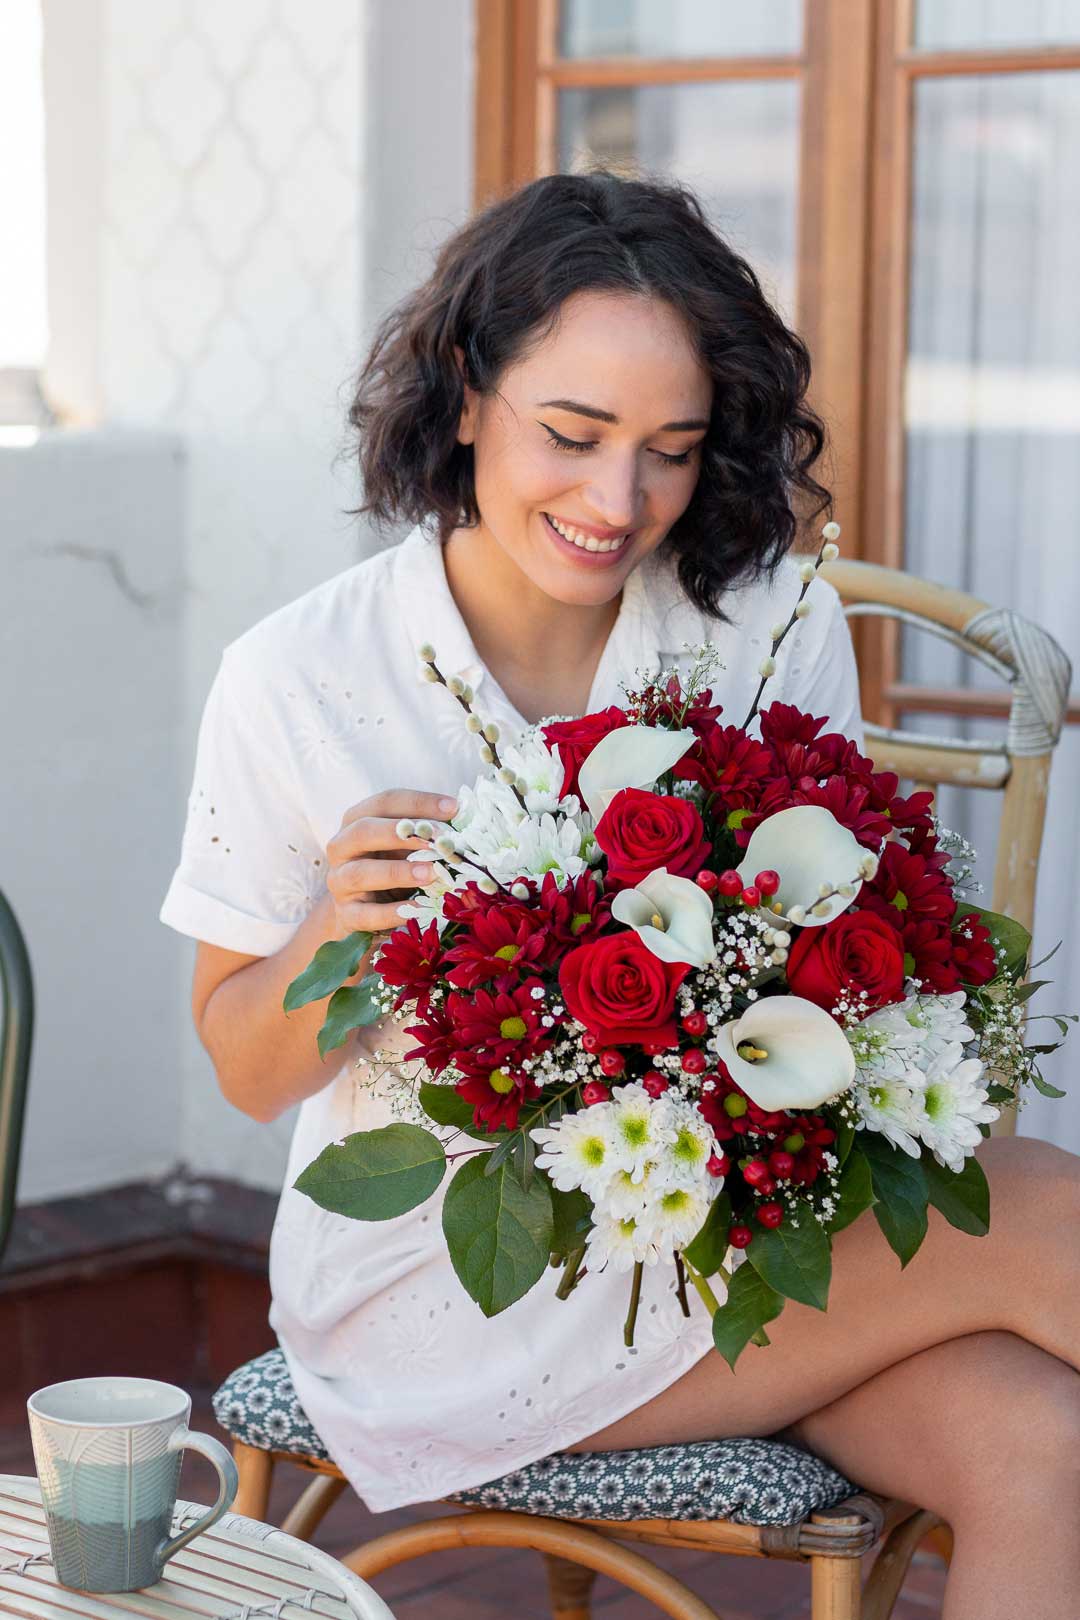 Top 6 Flower Delivery Companies In Spain | My Decorative